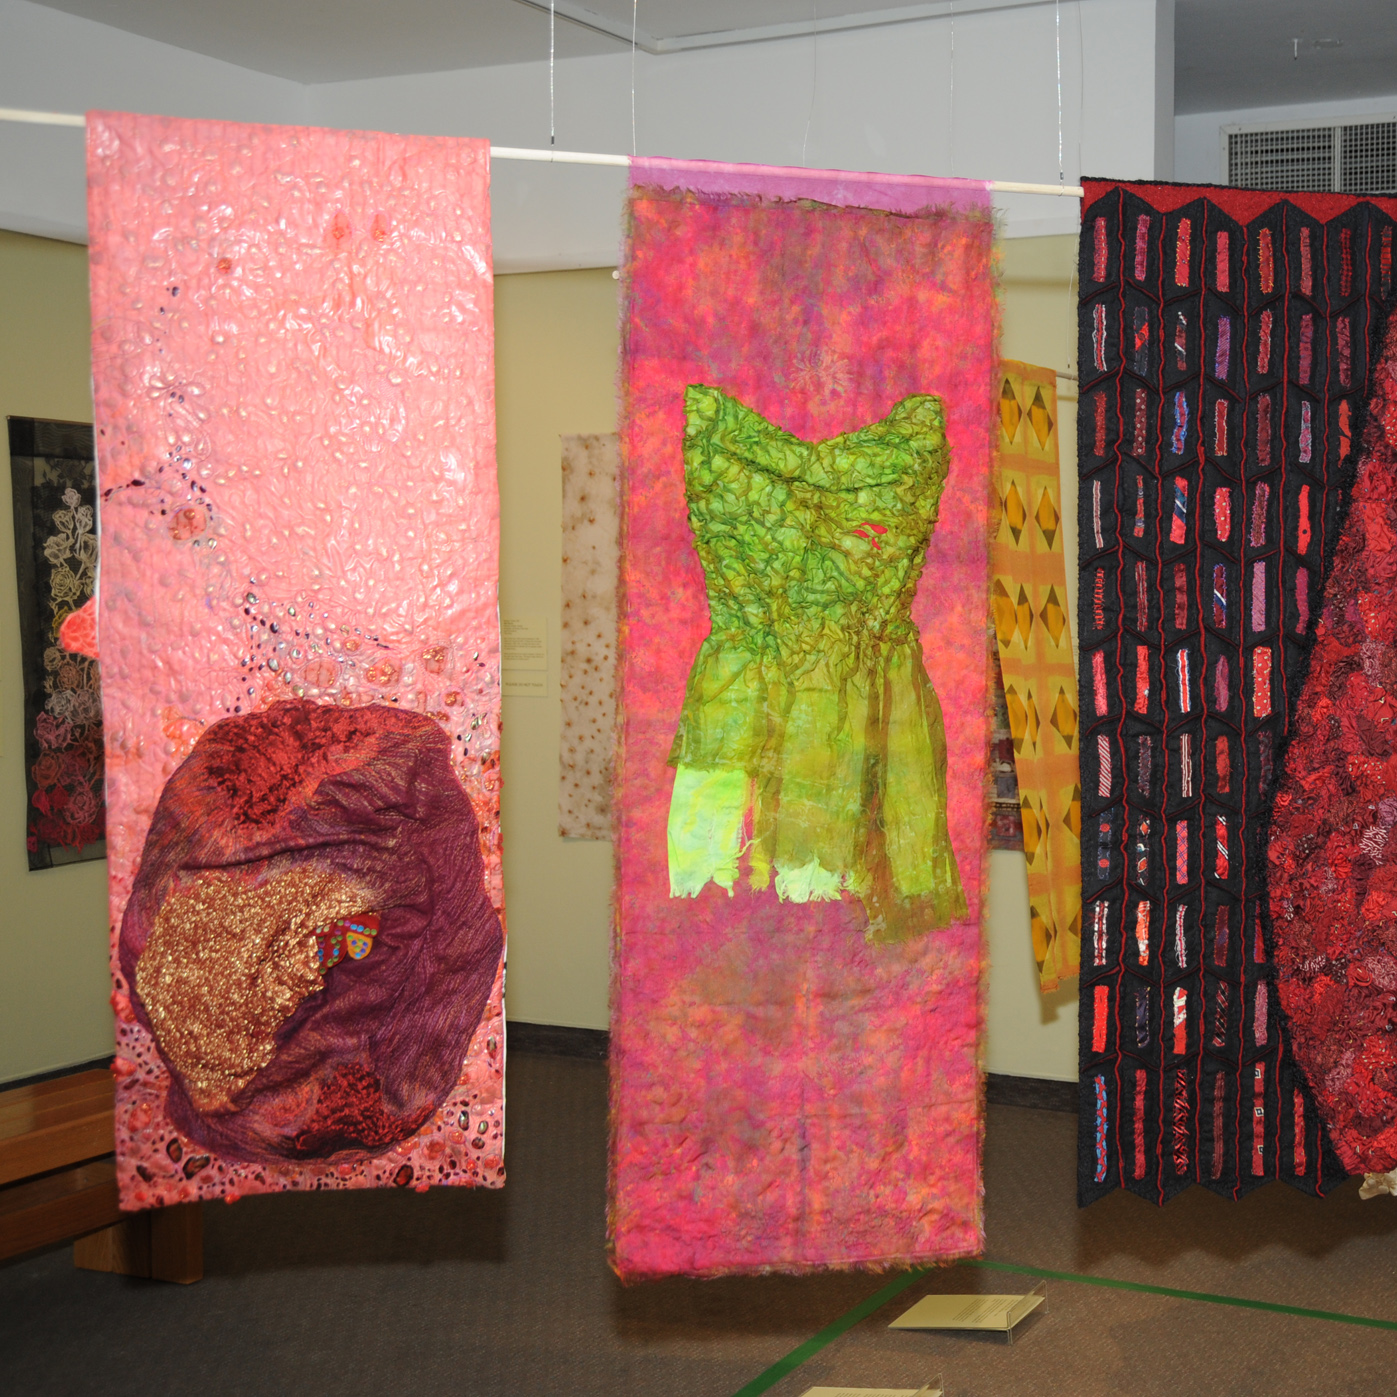 Sum of the Parts Exhibition with surface designs hanging on display